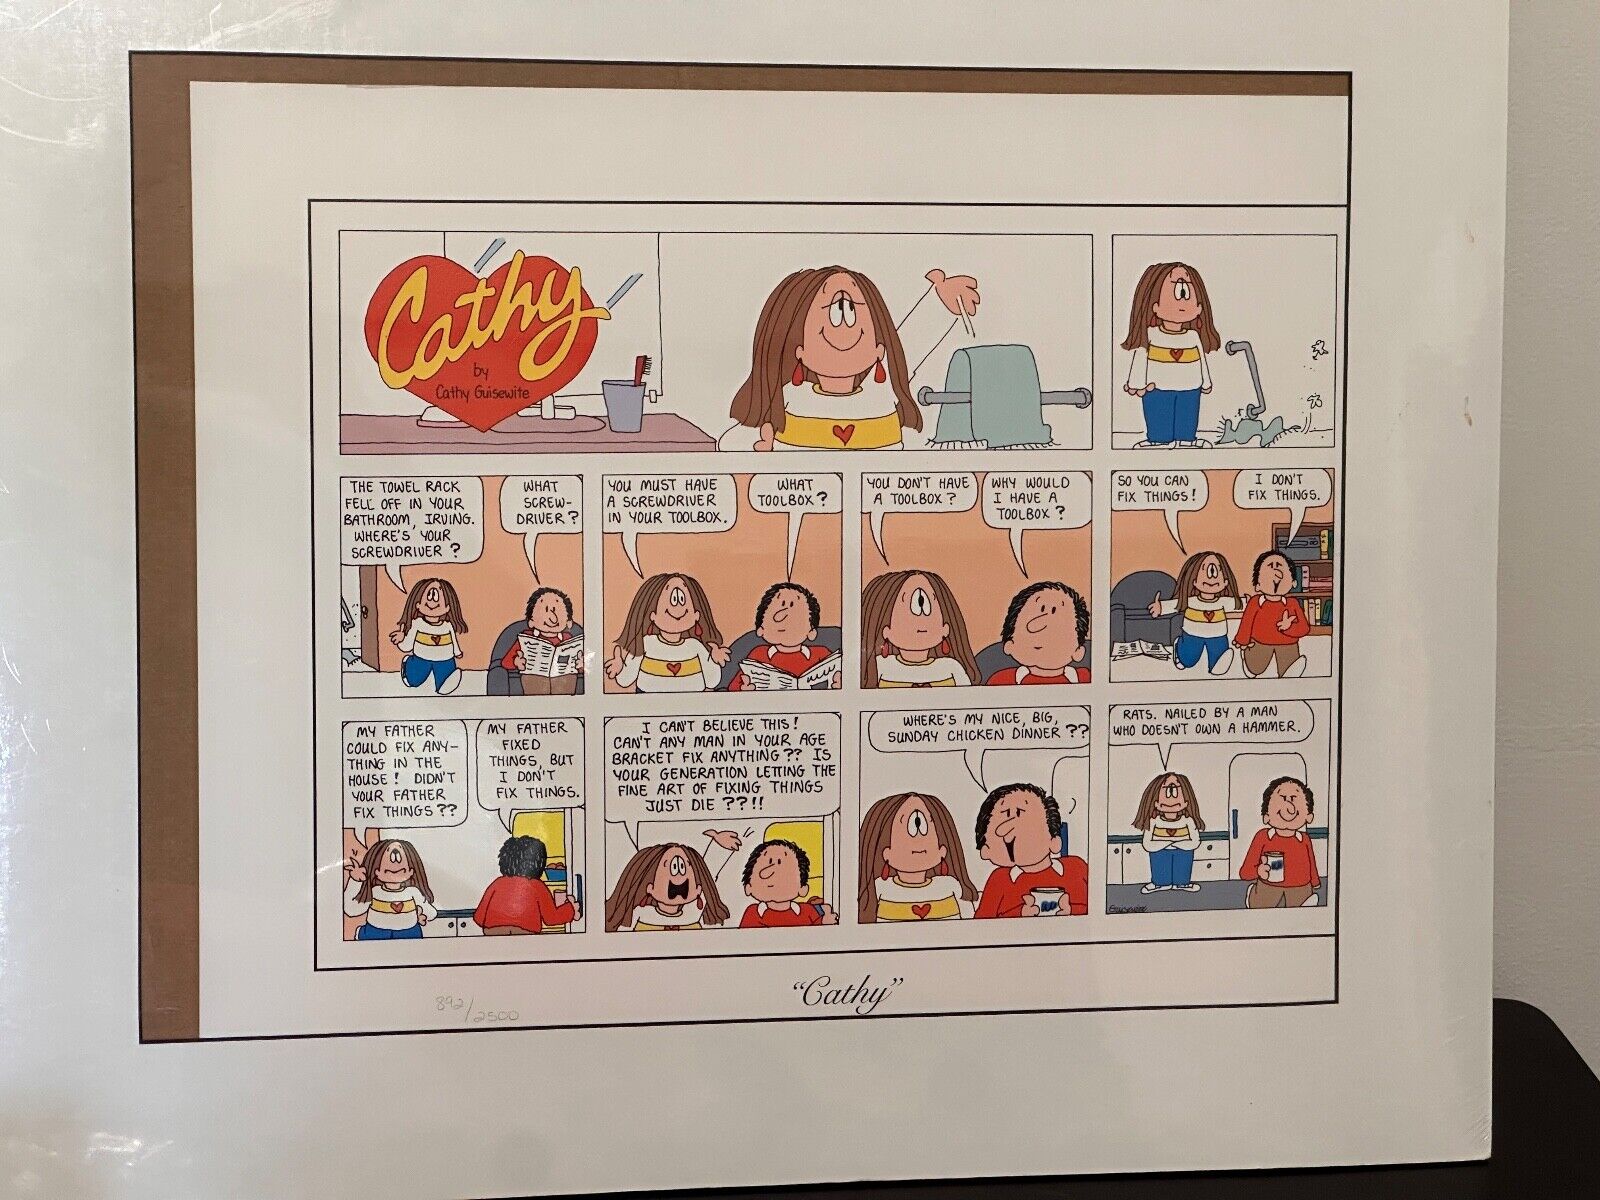 Cathy Comic Cathy Guisewite Lithograph Numbered 892/2500 Museum of Cartoon Art